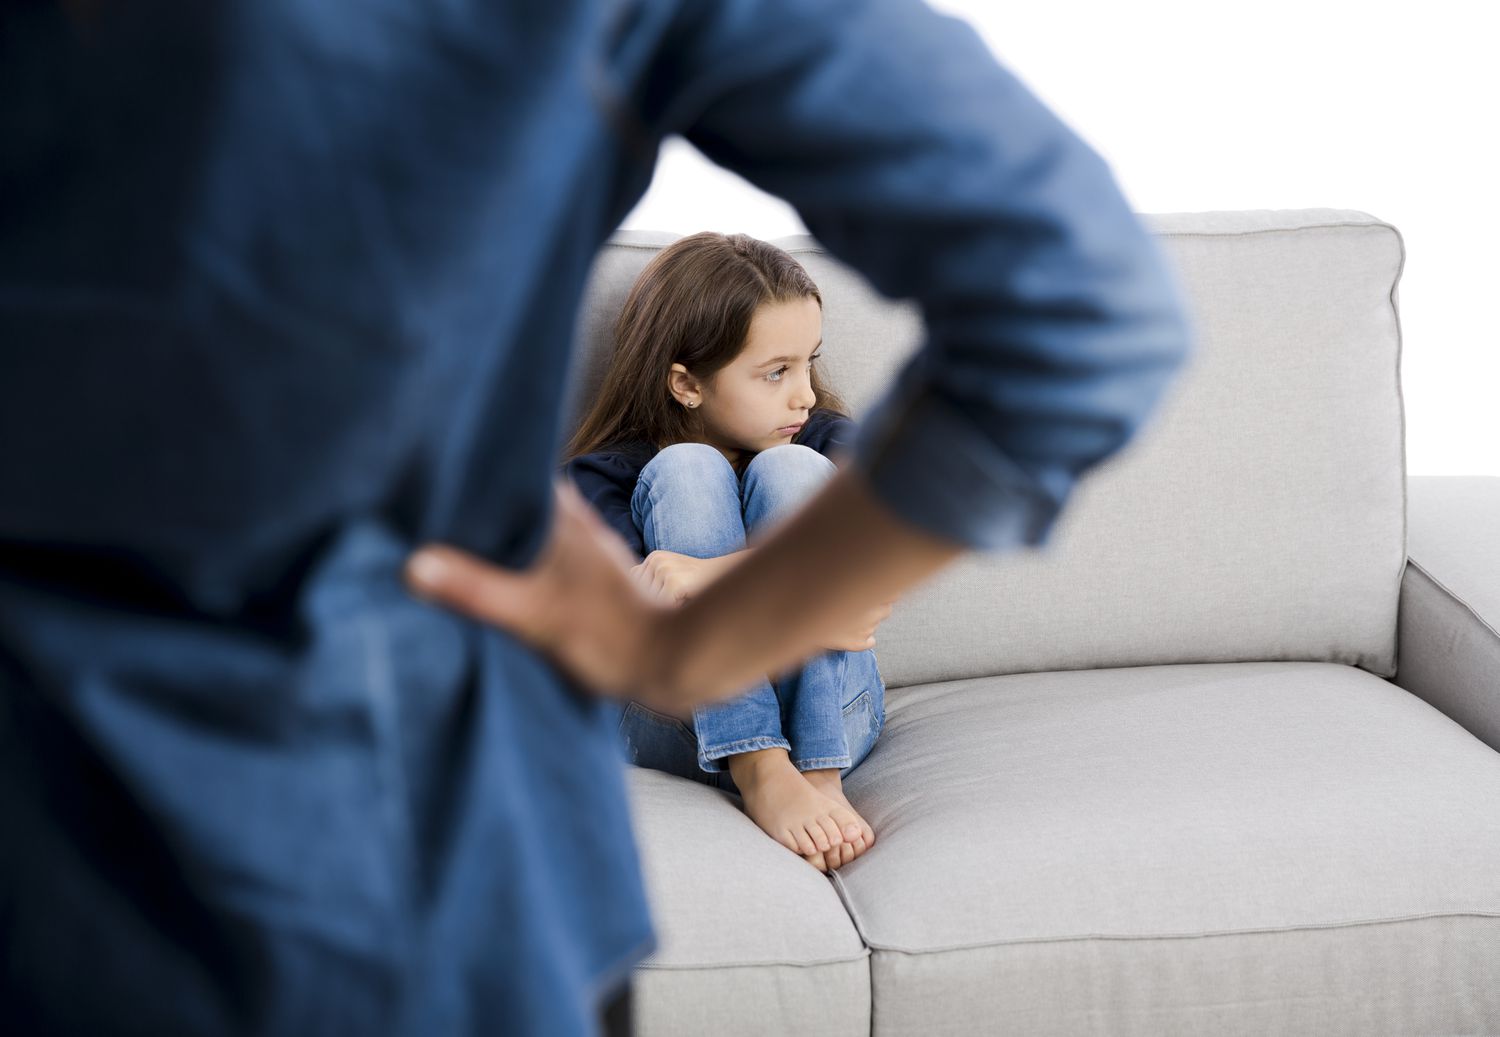 what Every Parent Should Know About Child Abuse